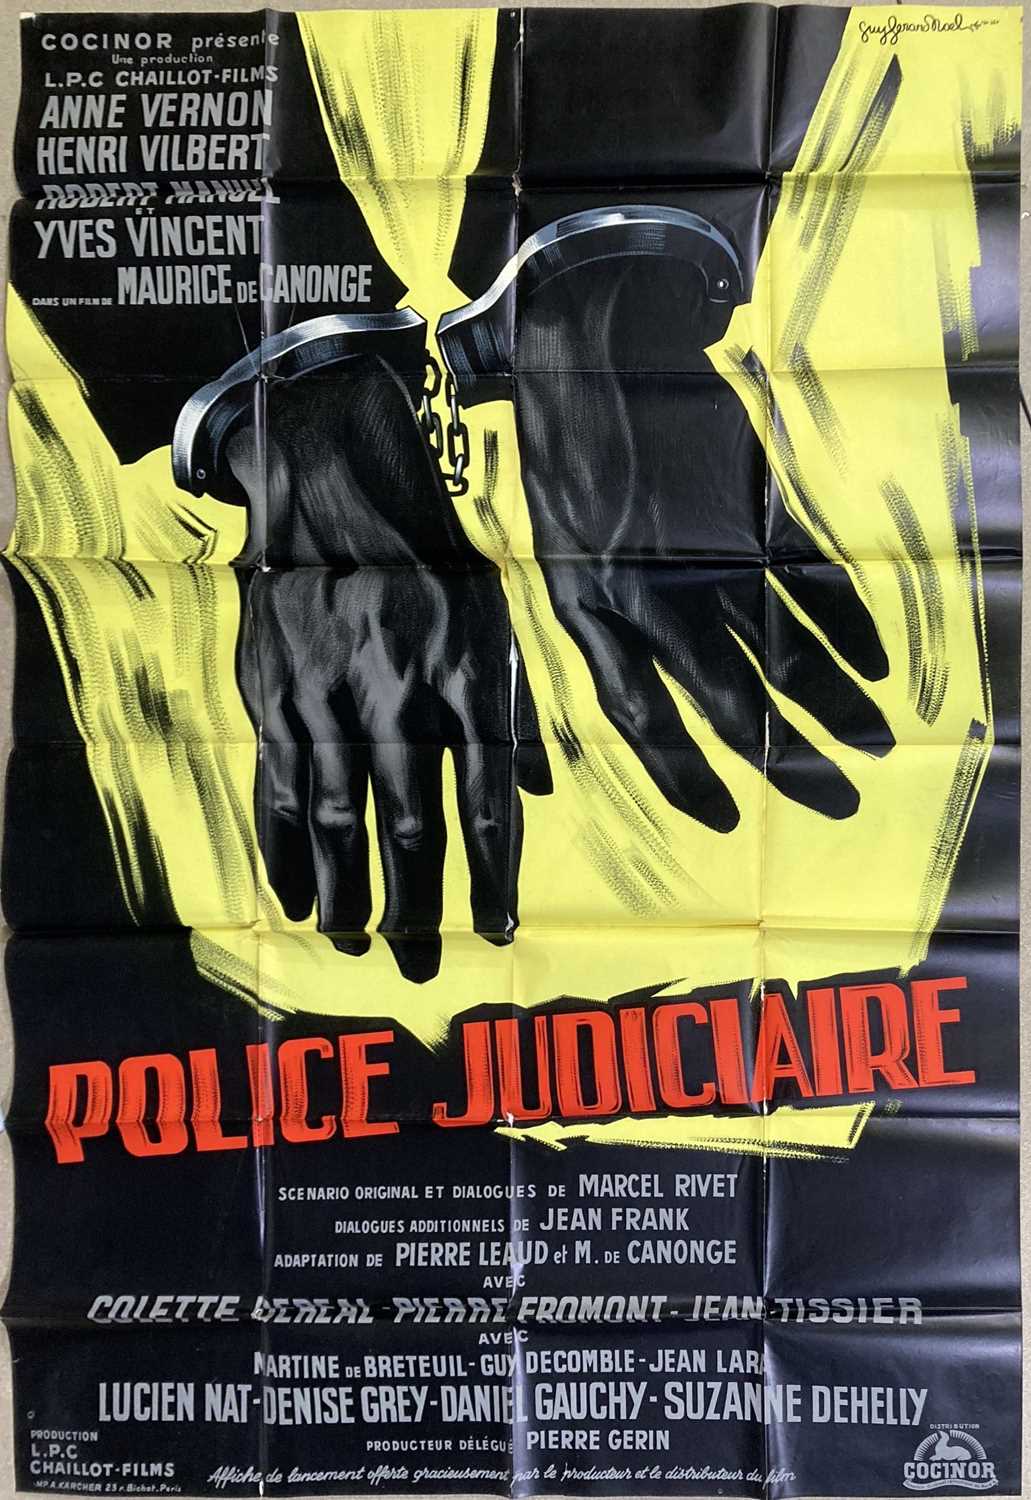 VINTAGE FOREIGN FILM POSTERS. - Image 3 of 5